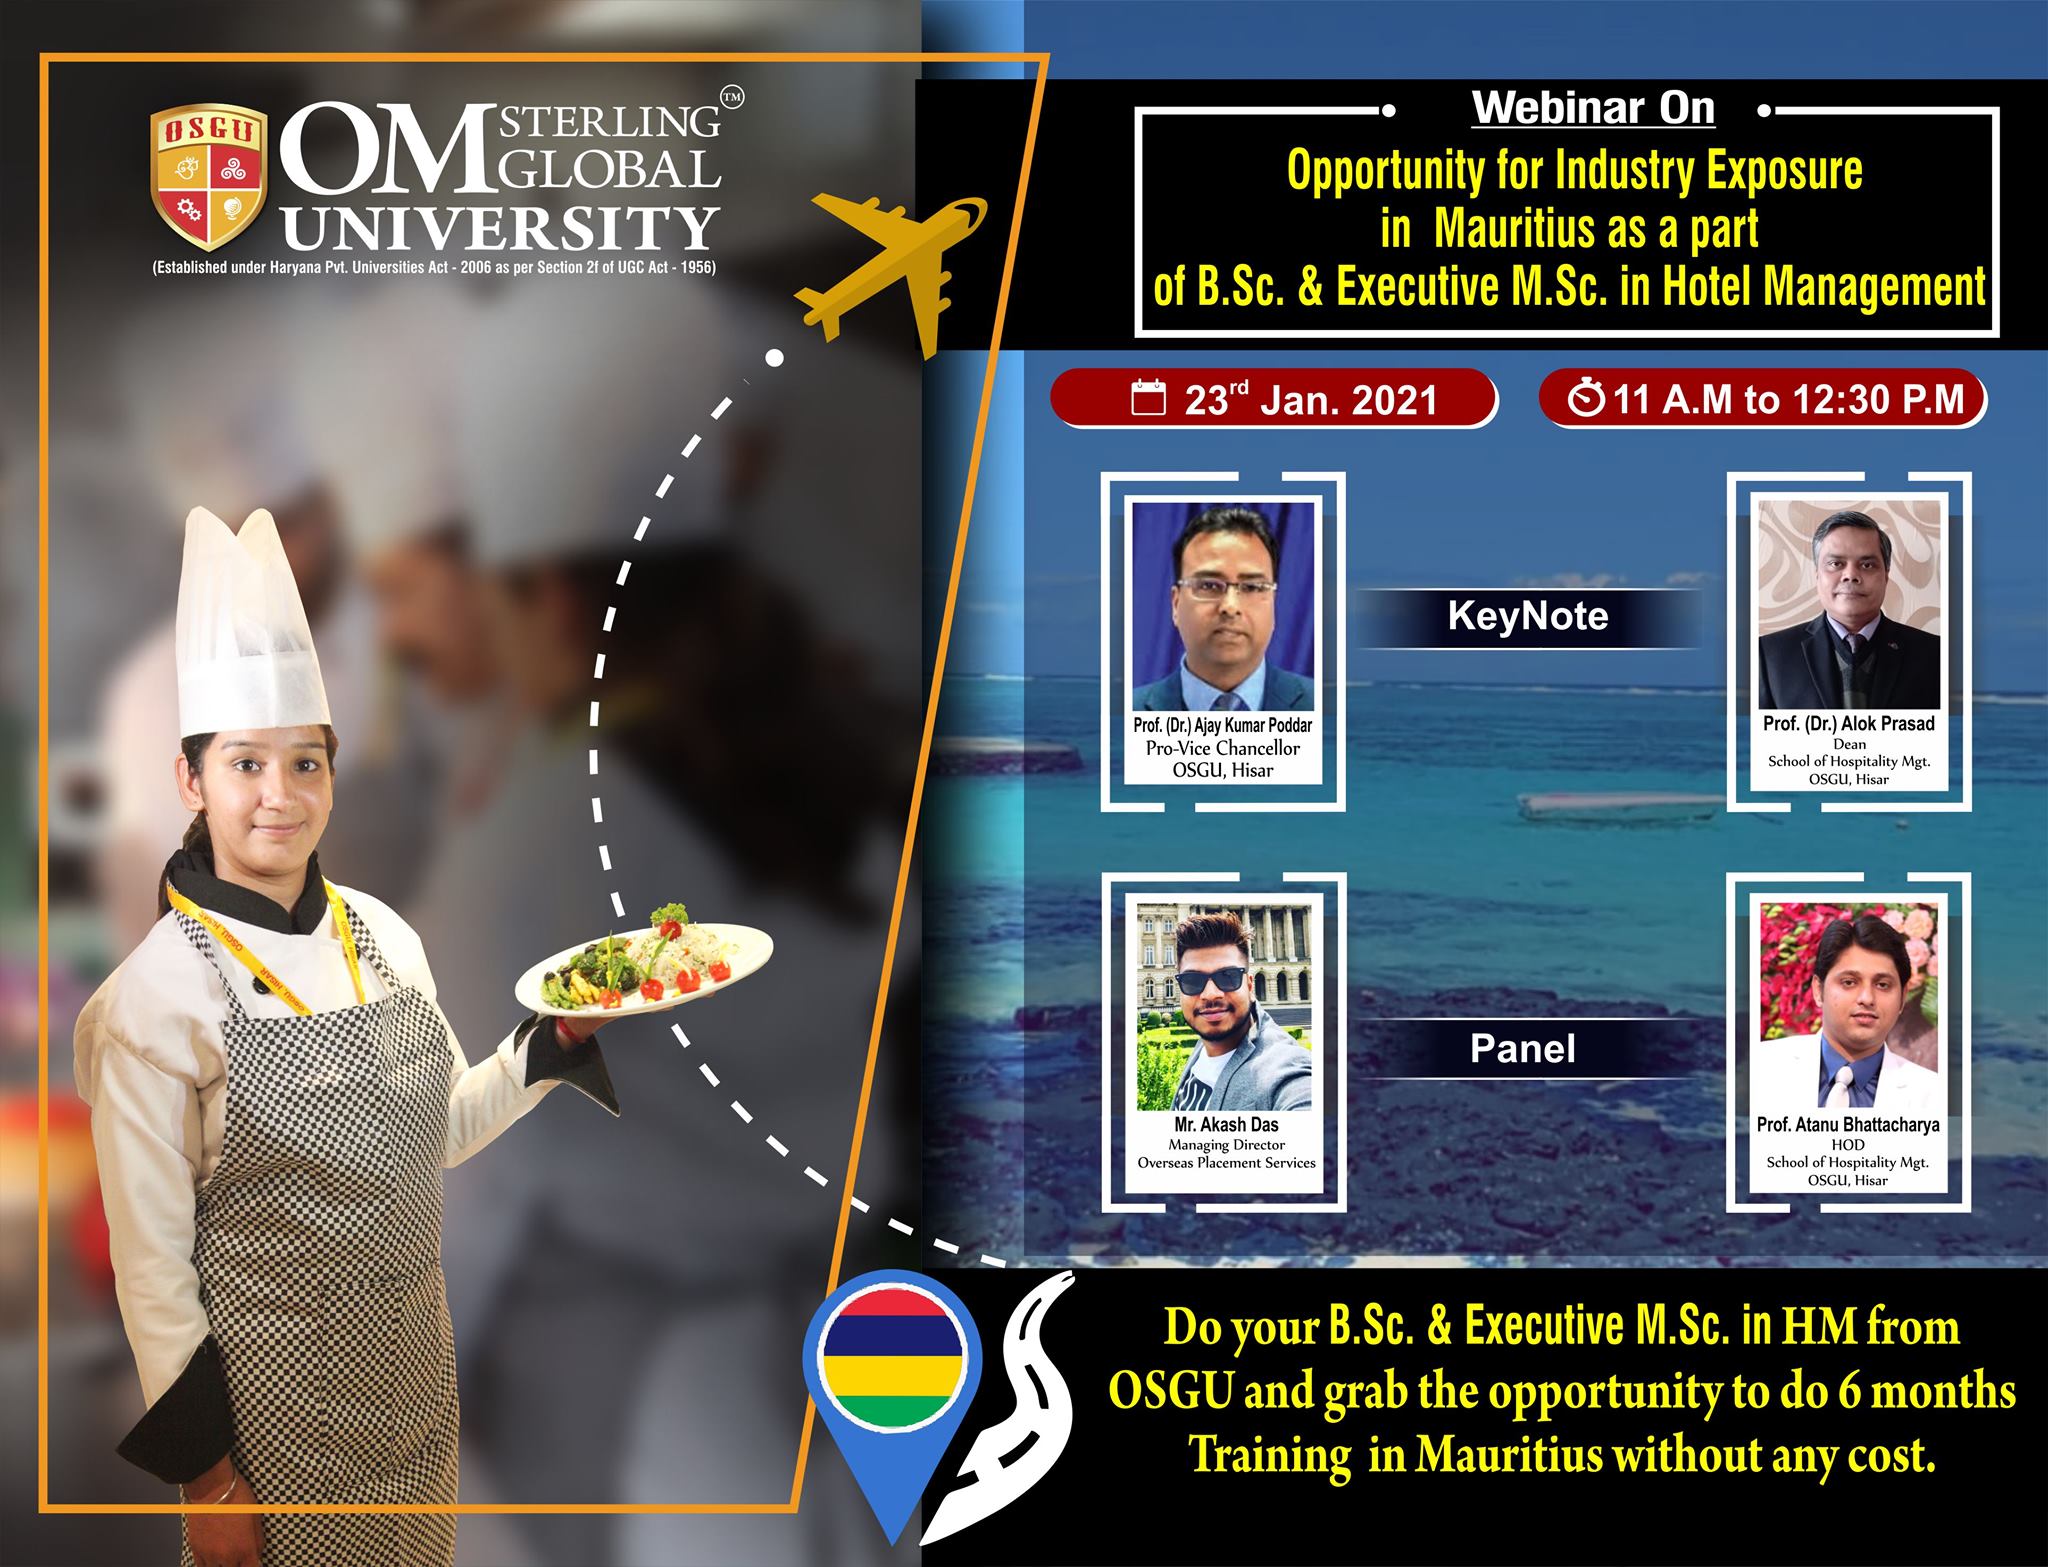 Shape your career through hospitality sector; Join B.Sc. or Executive M.Sc. in Hotel Management in OSGU to build your future